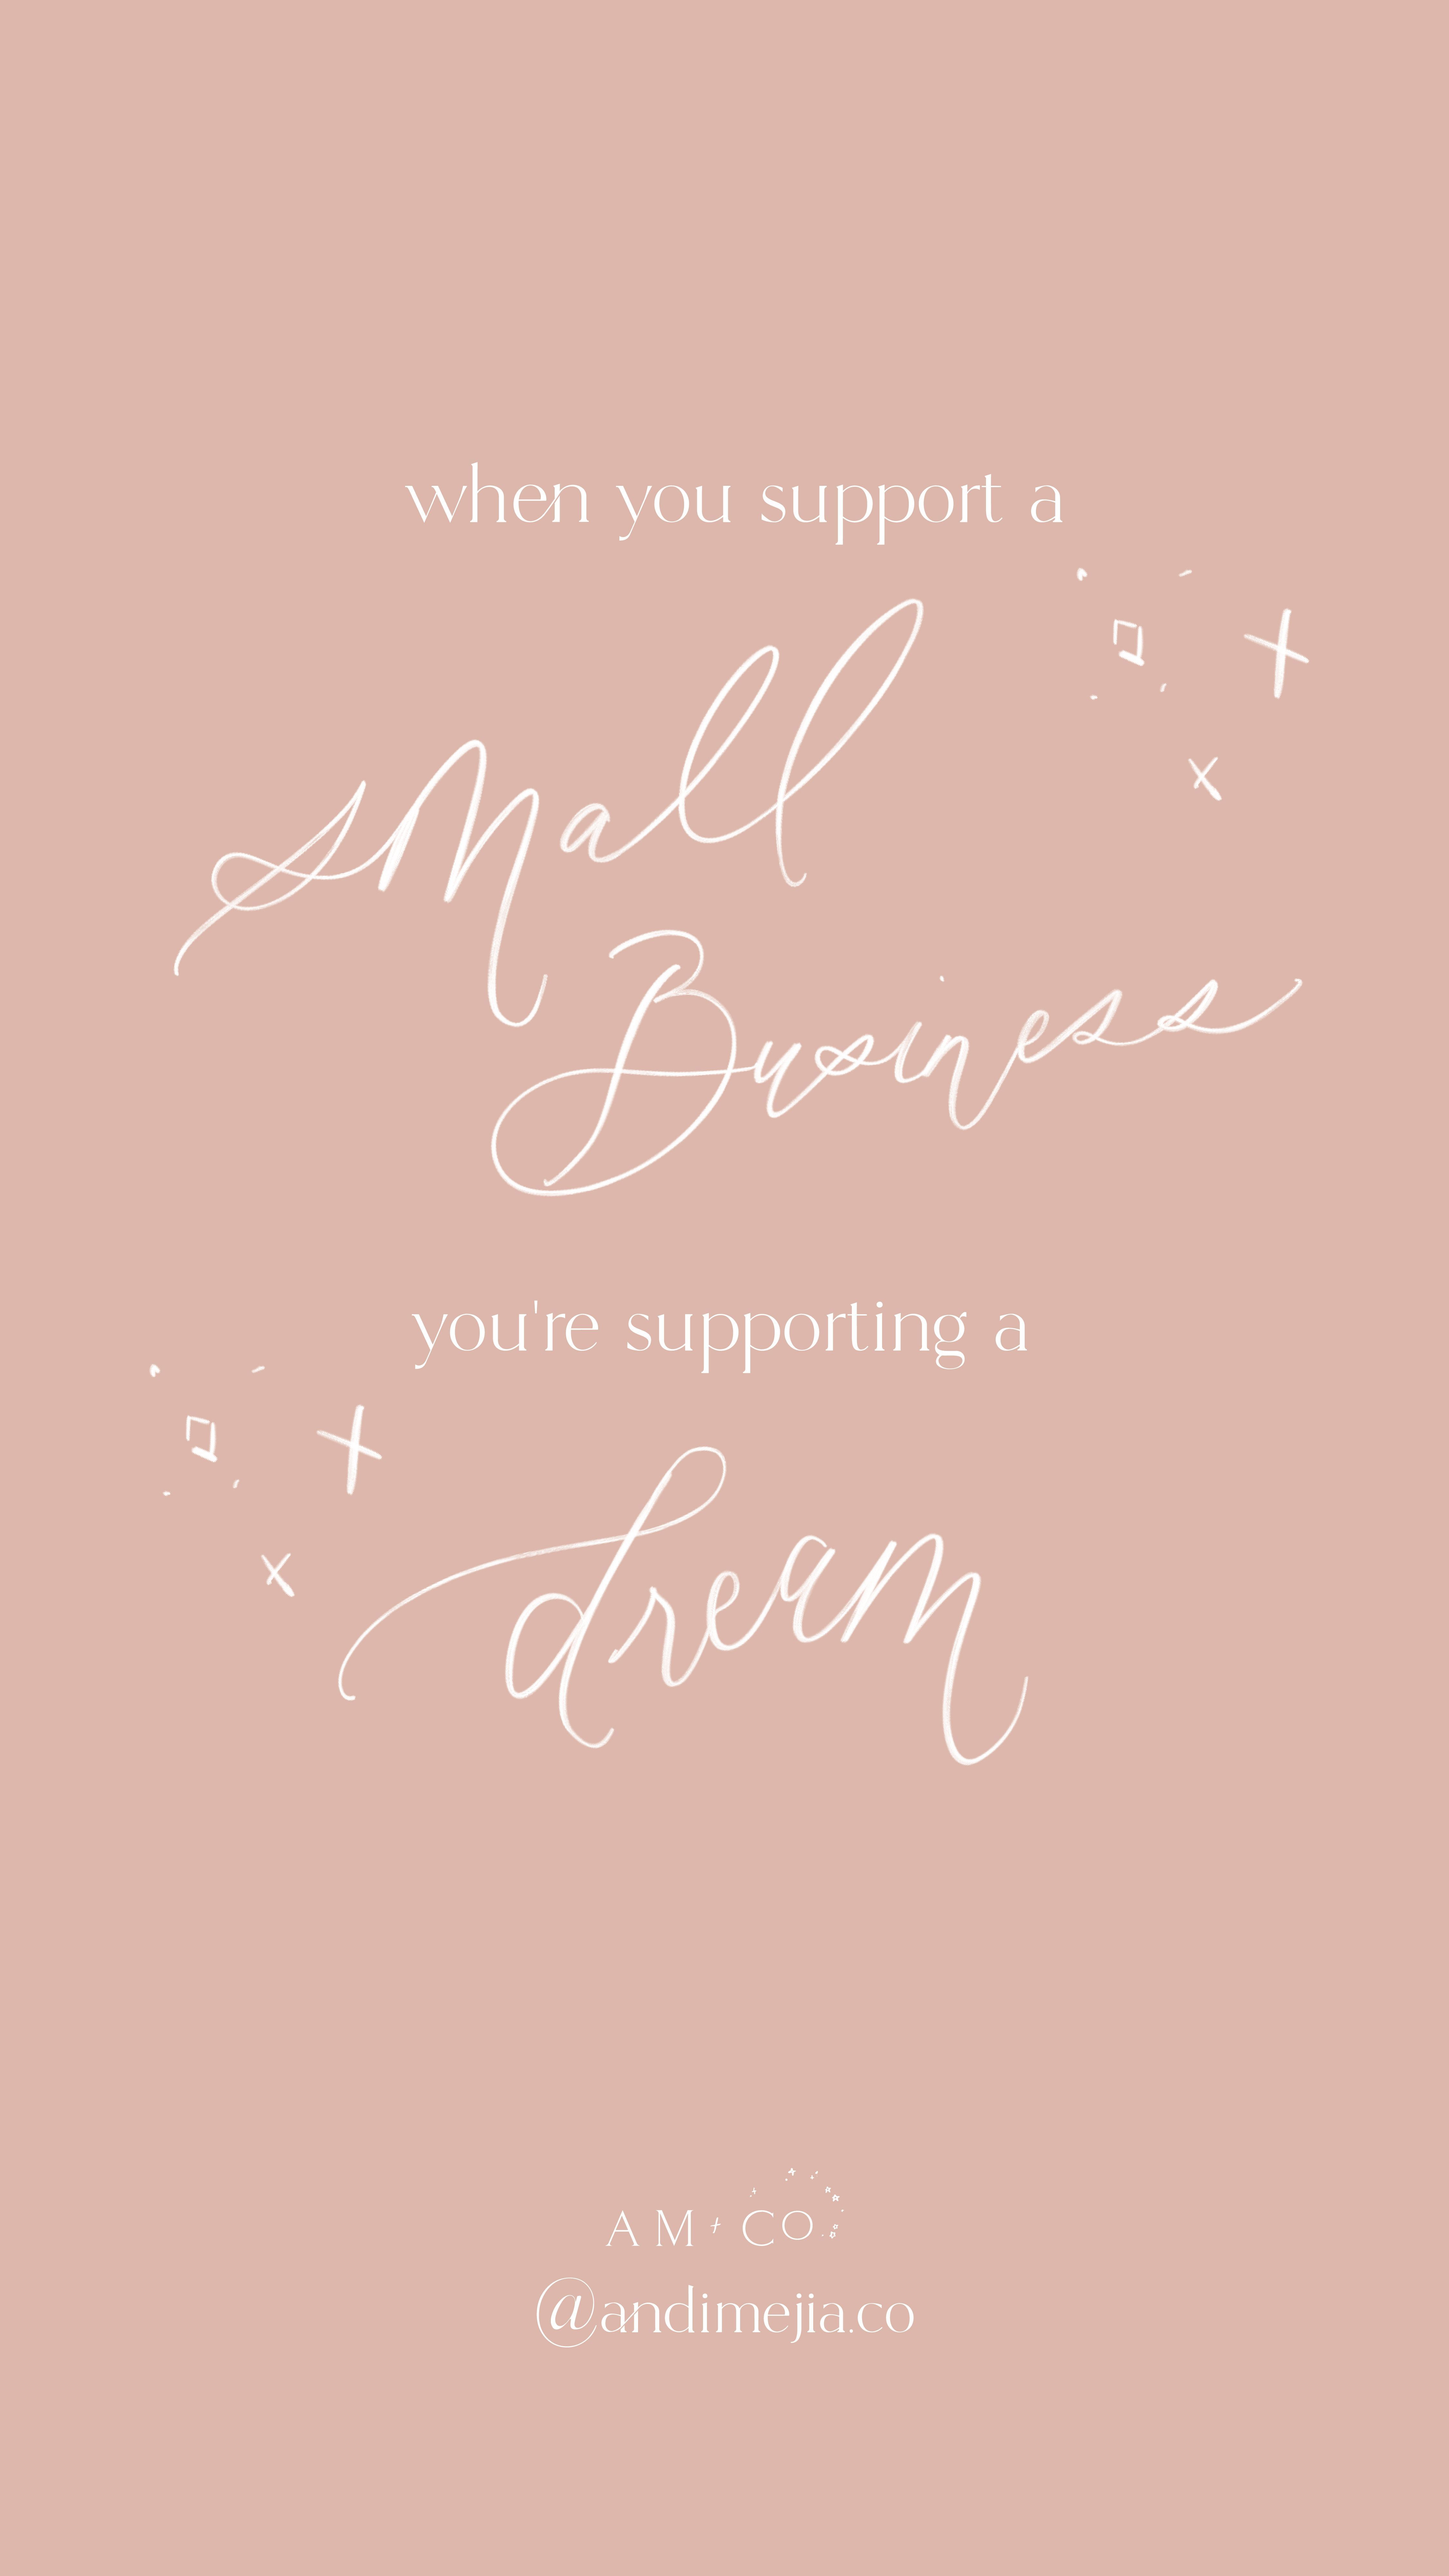 When you support a small business, you're supporting a dream iPhone wallpaper. Small business graphics, Graphic design, Pink wallpaper iphone